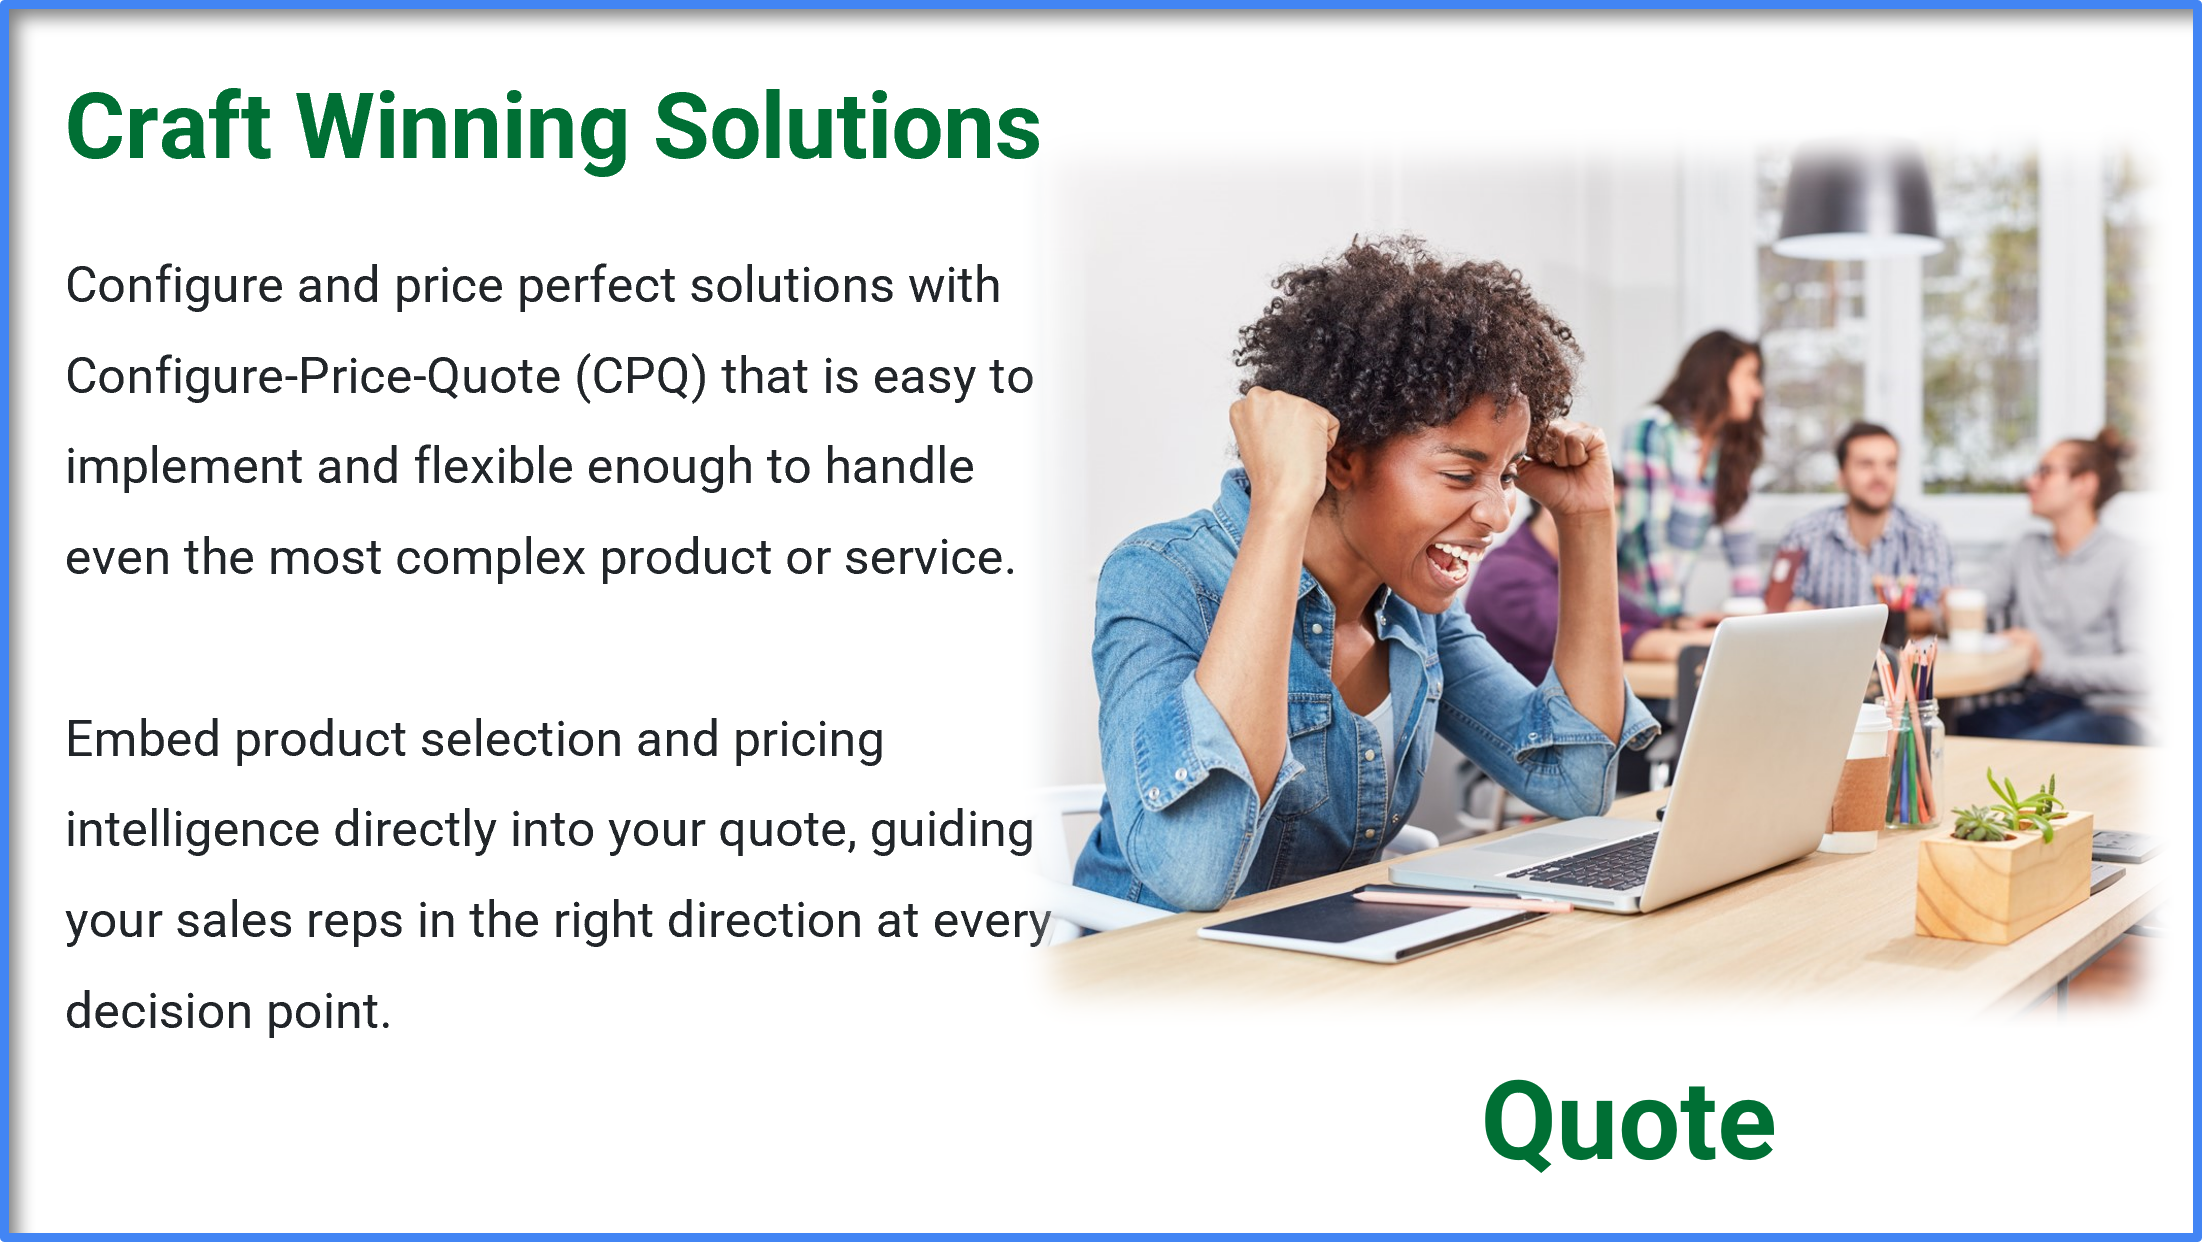 GleanQuote Software - 2